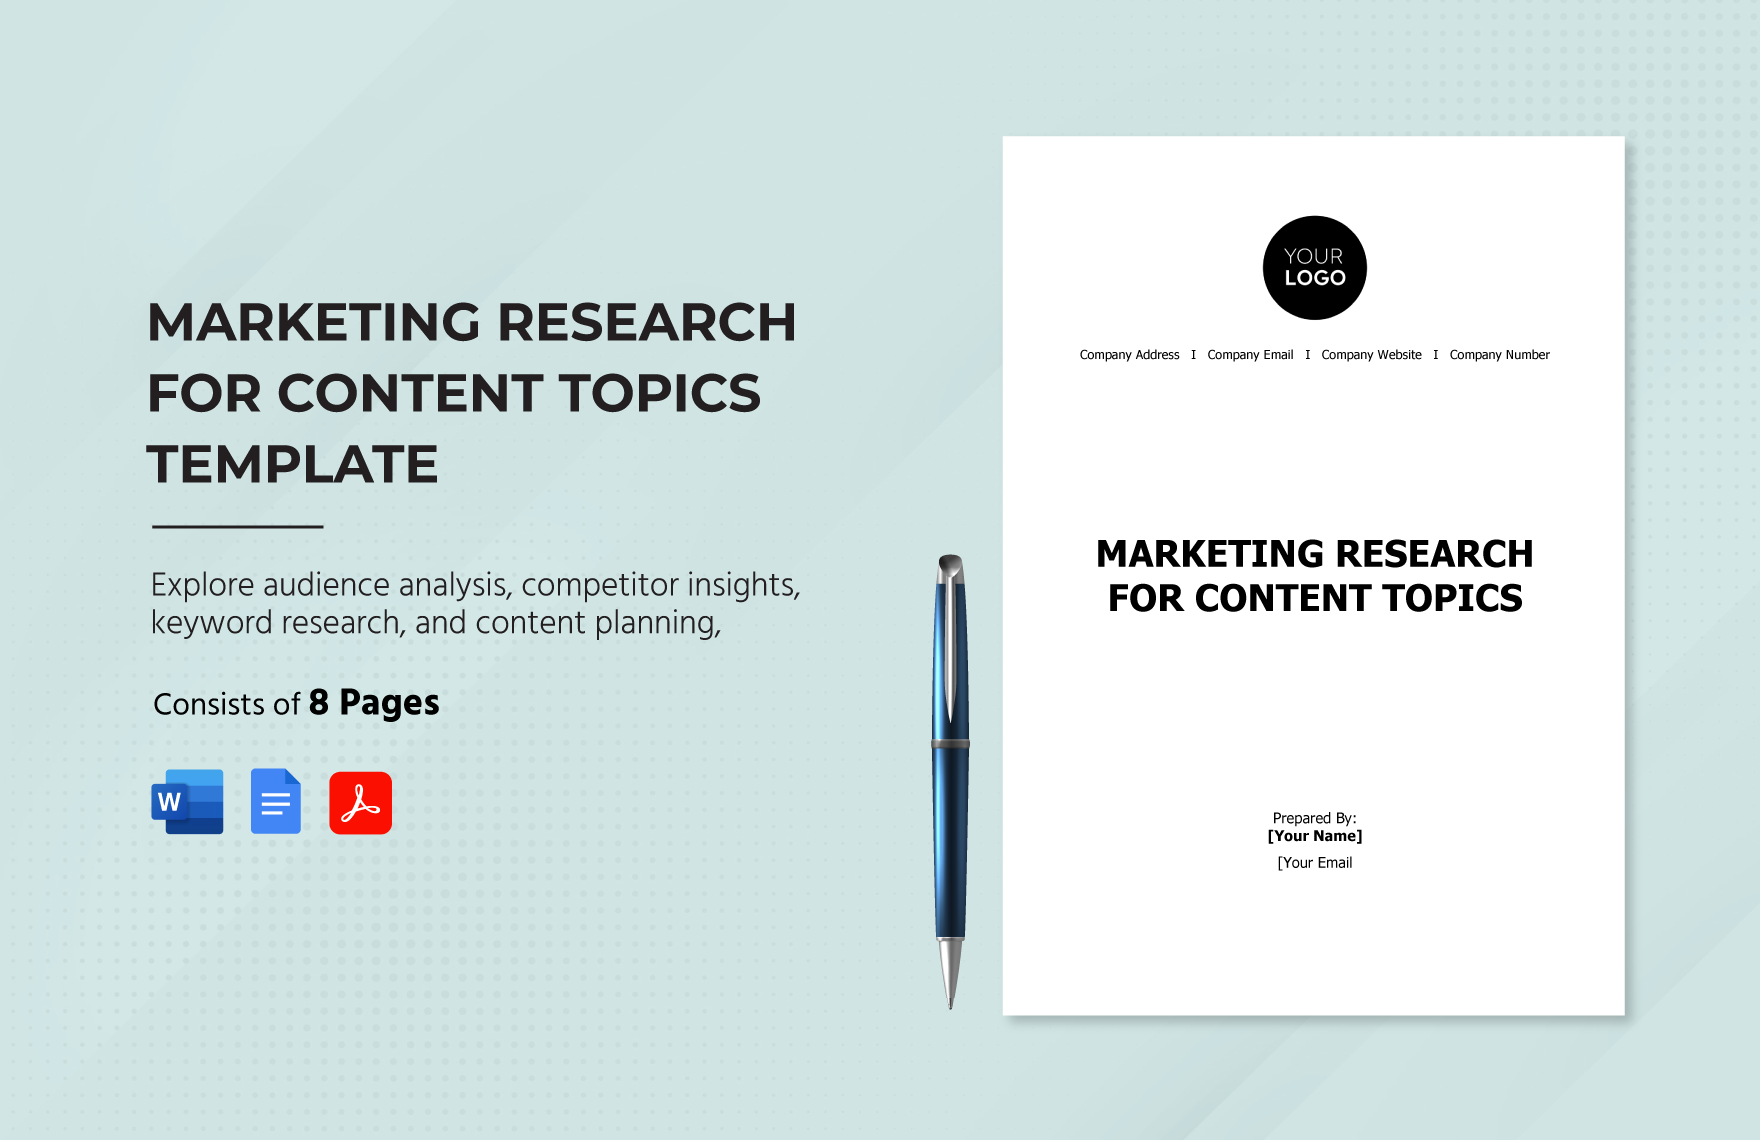 Marketing Research for Content Topics Template